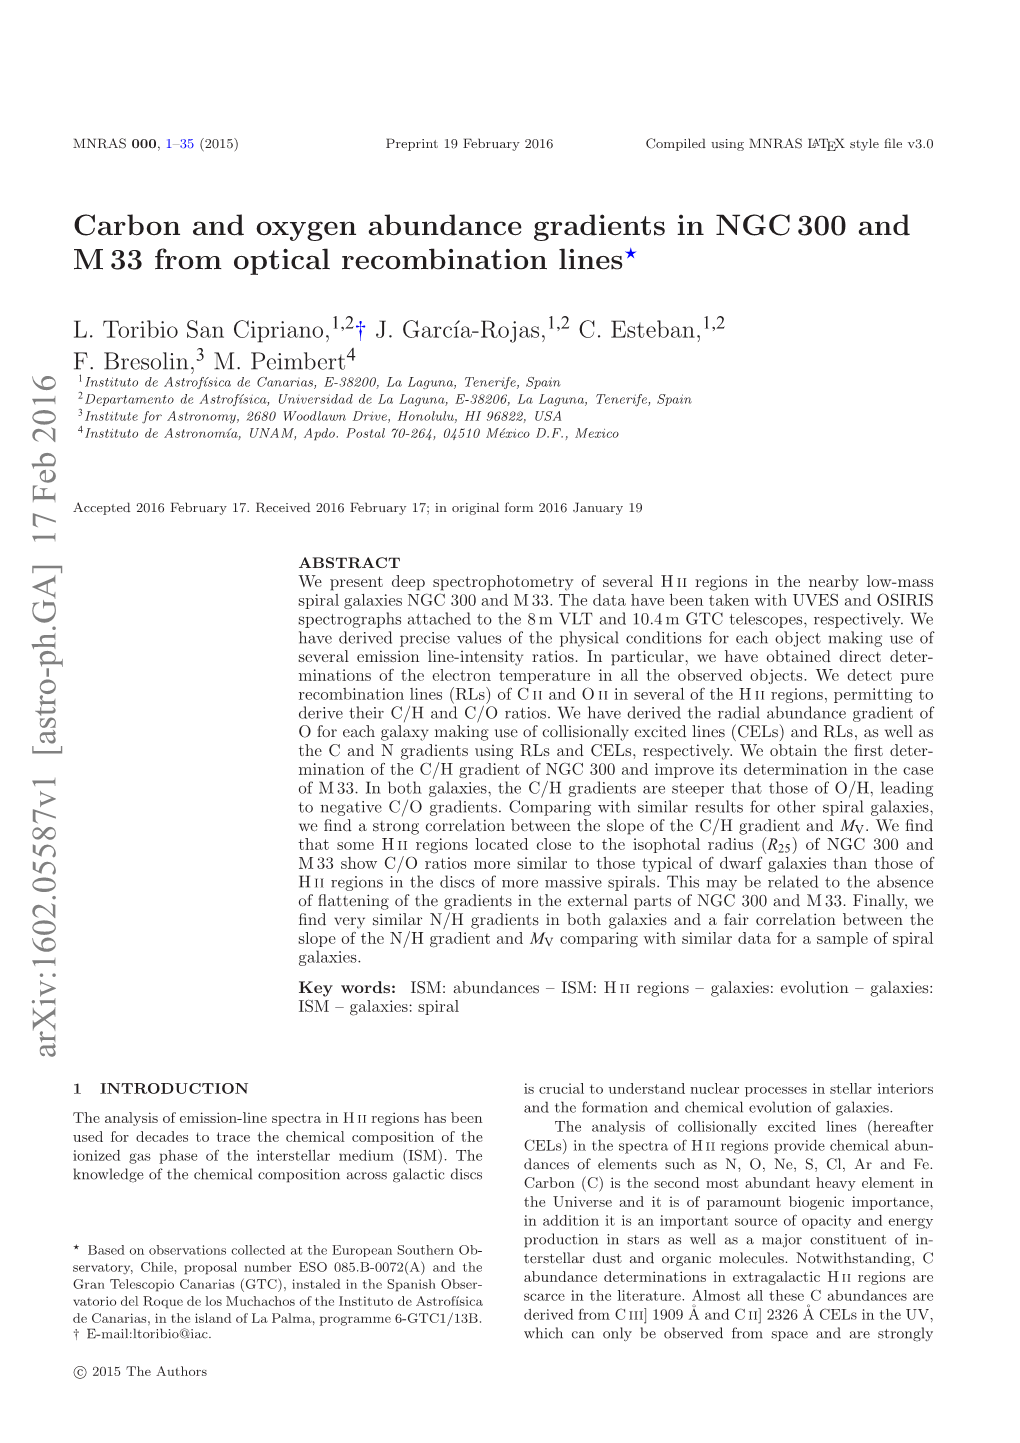 Carbon and Oxygen Abundance Gradients in NGC 300 and M 33 from Optical Recombination Lines